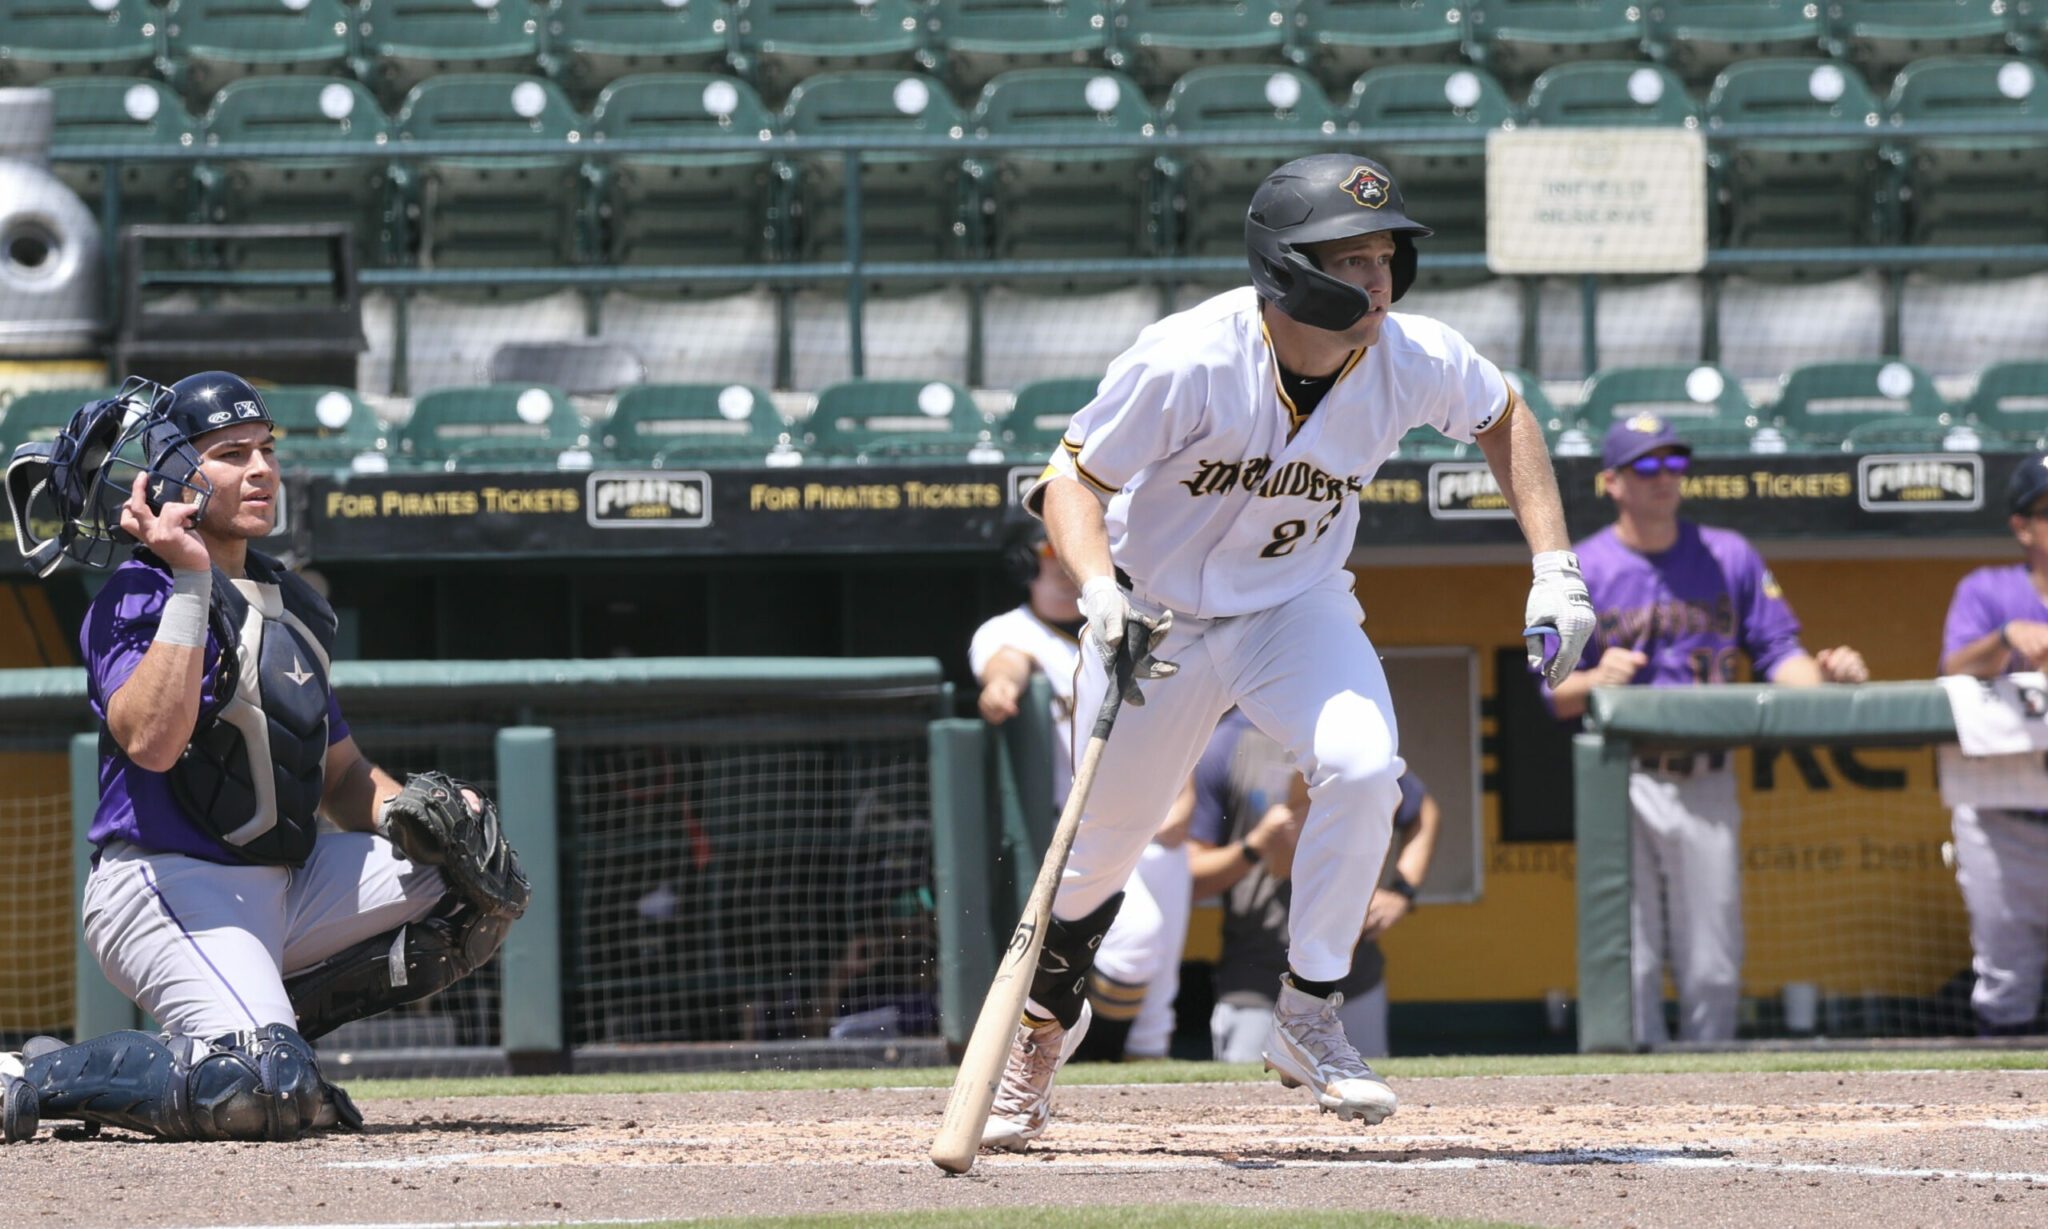 Pirates Prospects Daily: Swing Adjustment Could Bring More Power For Tres Gonzalez